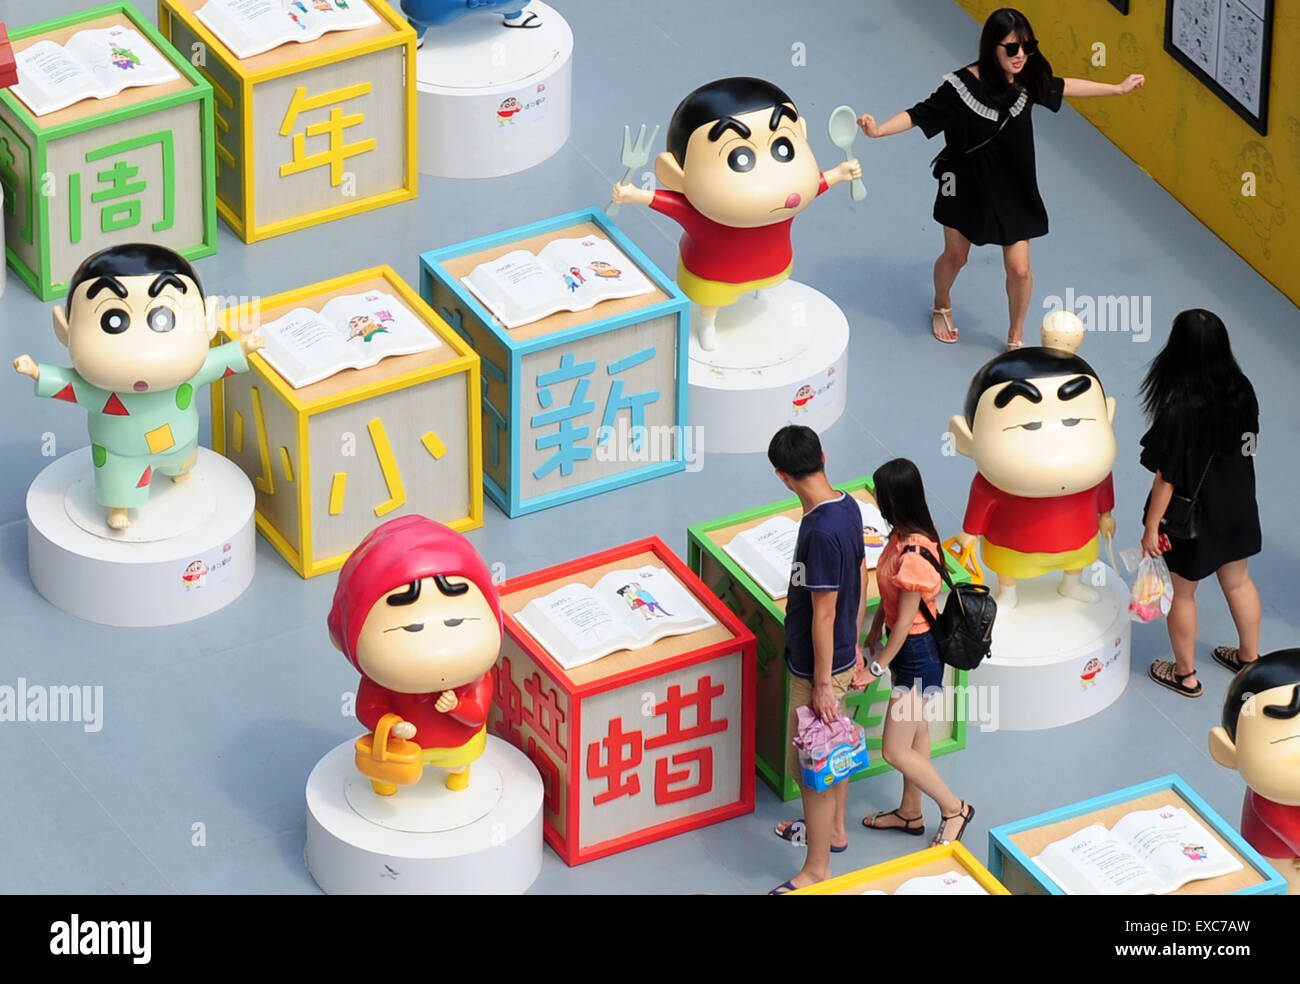 Shenyang. 11th July, 2015. Citizens visit an exhibition marking the 25th anniversary of Japanese manga series Crayon Shin-chan in Shenyang, northeast China's Liaoning Province July 11, 2015. Dozens of manga and theatrical version of Crayon Shin-chan and related figures were displayed on the exhibition that opened to public on Saturday. © Xinhua/Alamy Live News Stock Photo